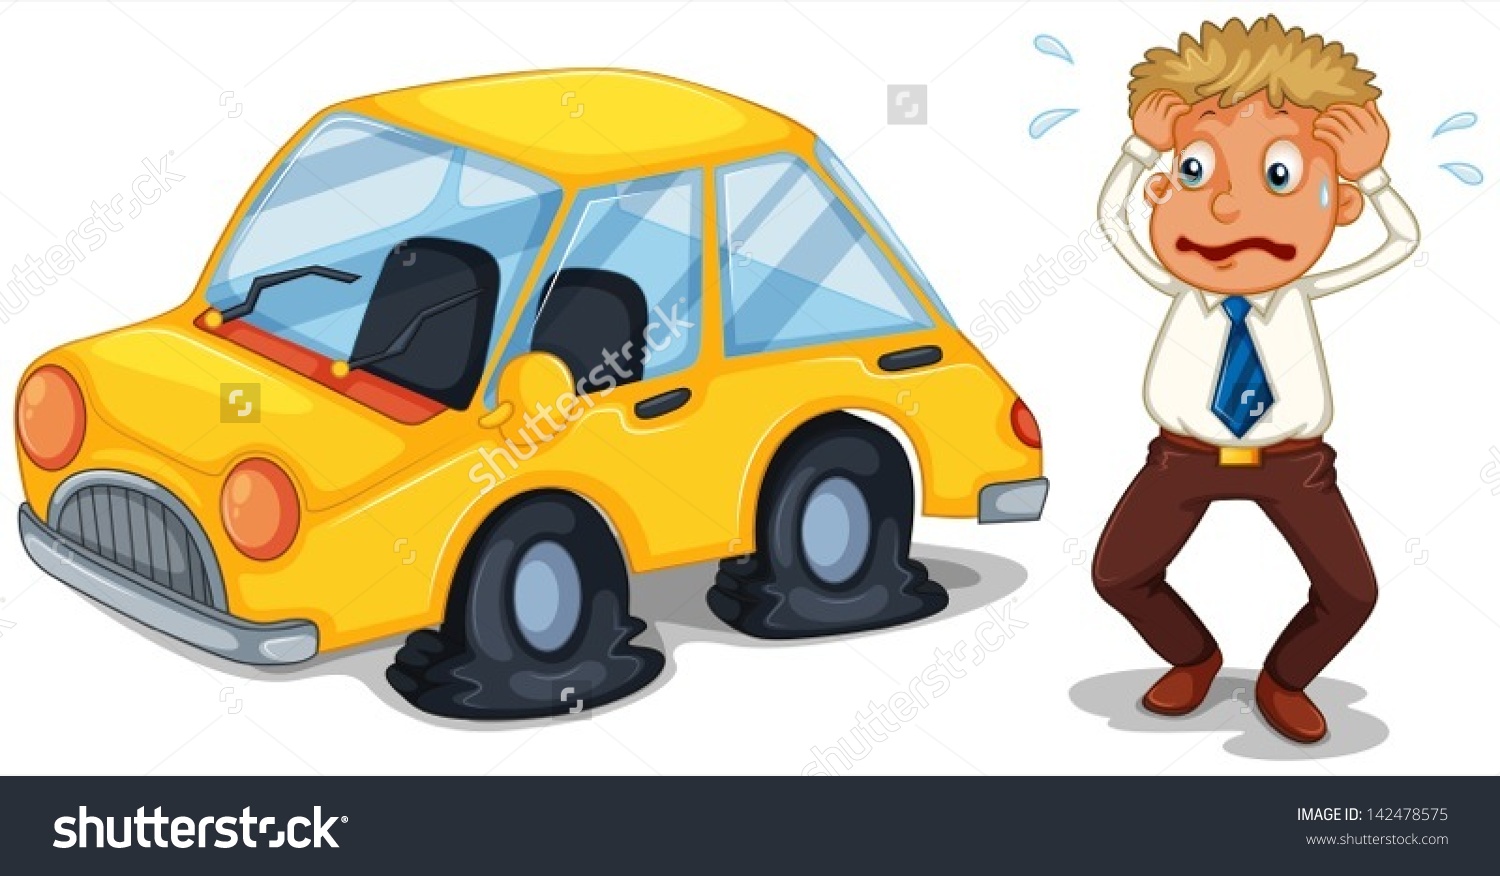 stock-vector-illustration-of-a-worried-man-beside-a-car-with-flat-tires-on-a-white-background-142478575.jpg